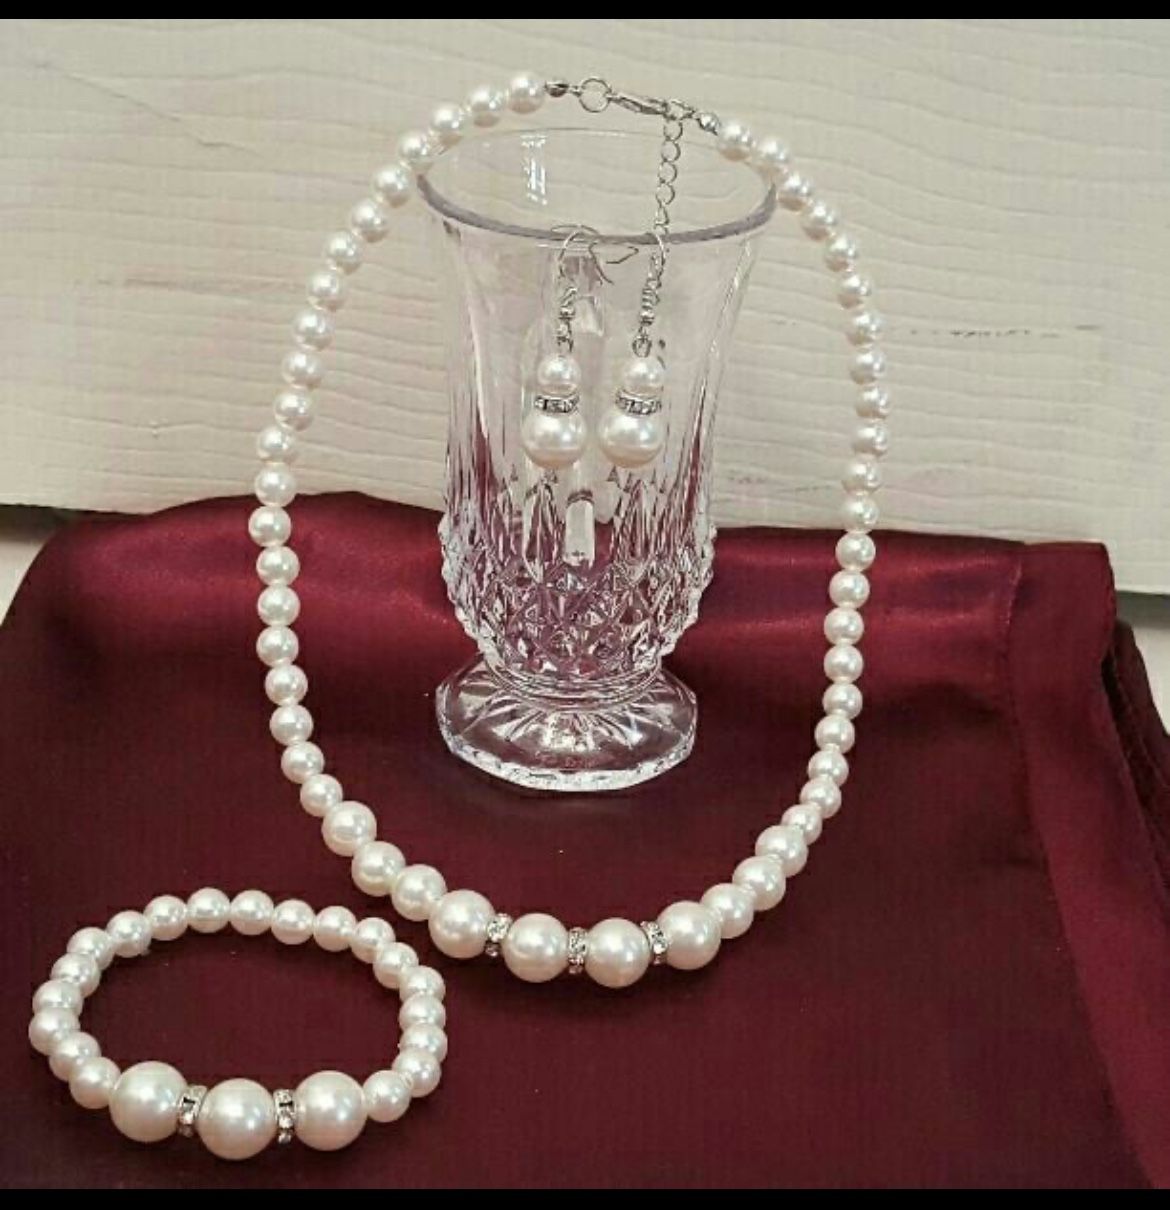 Necklace, Bracelet And Earrings Set